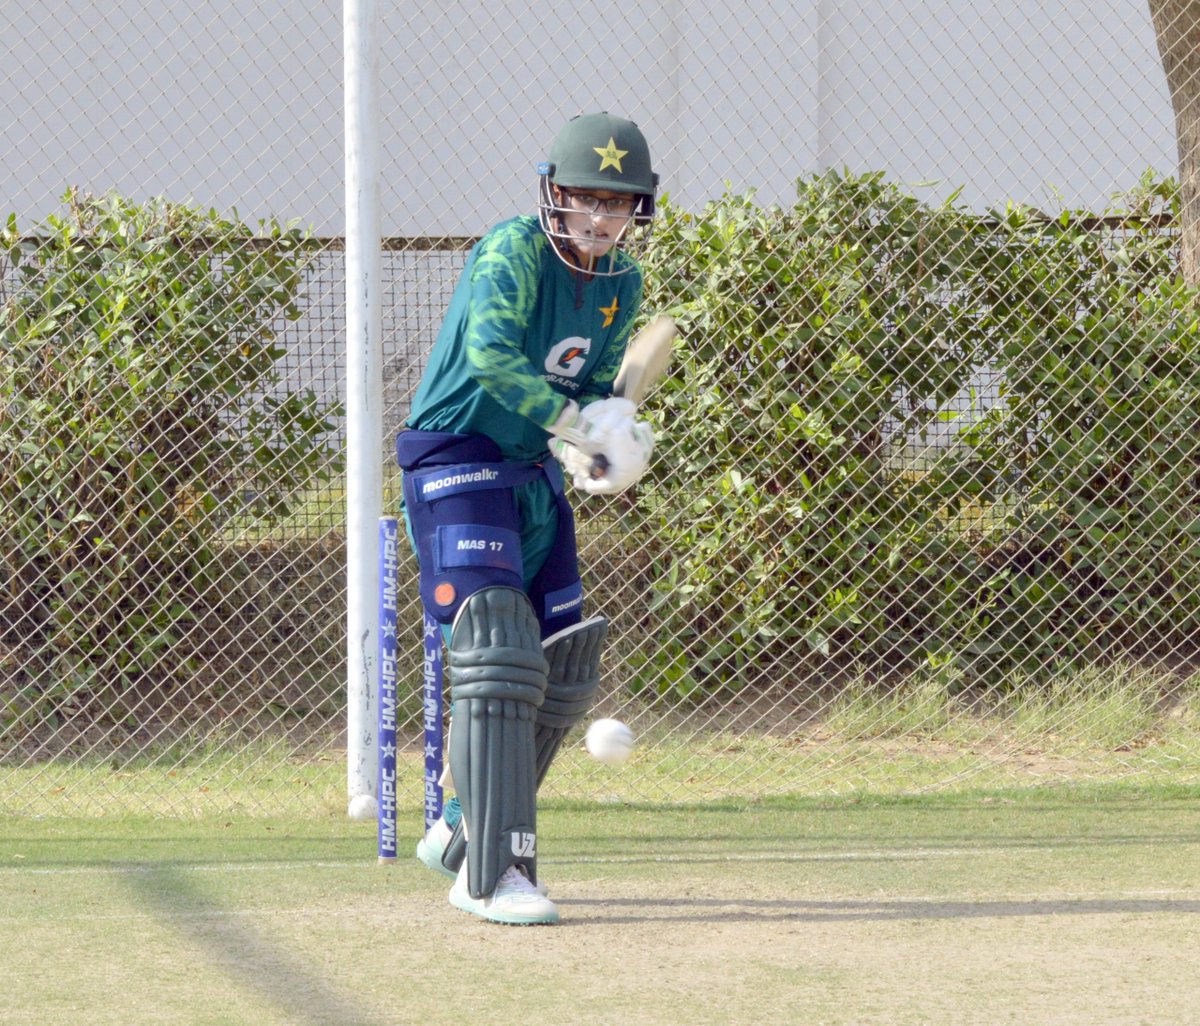 📸 Snapshots from the probables training camp in Karachi

#PAKWvWIW | #BackOurGirls